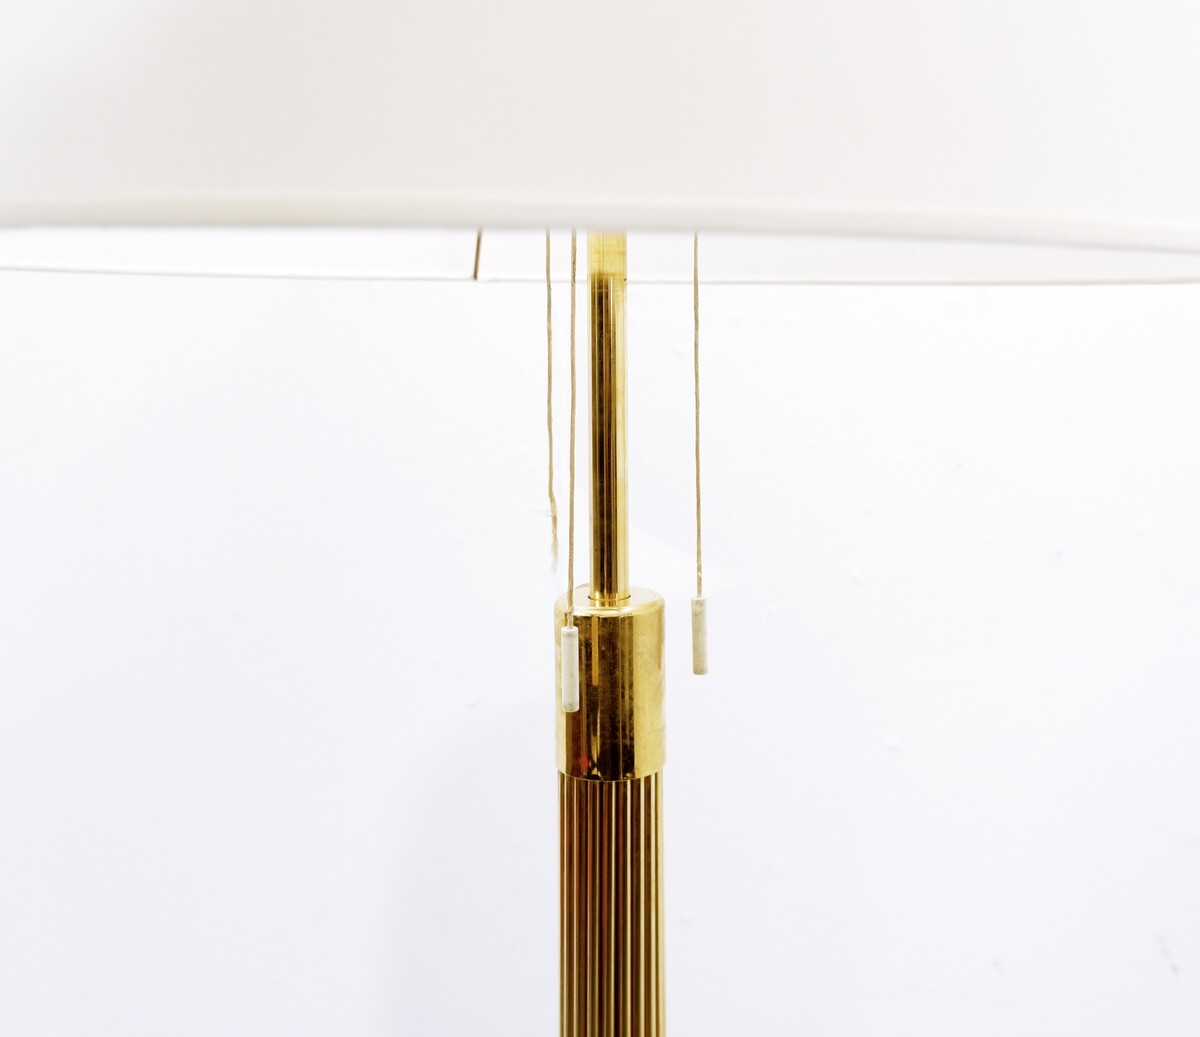 Mid Century Modern Floor Lamp by Verner Panton for Fritz Hansen - a pair available